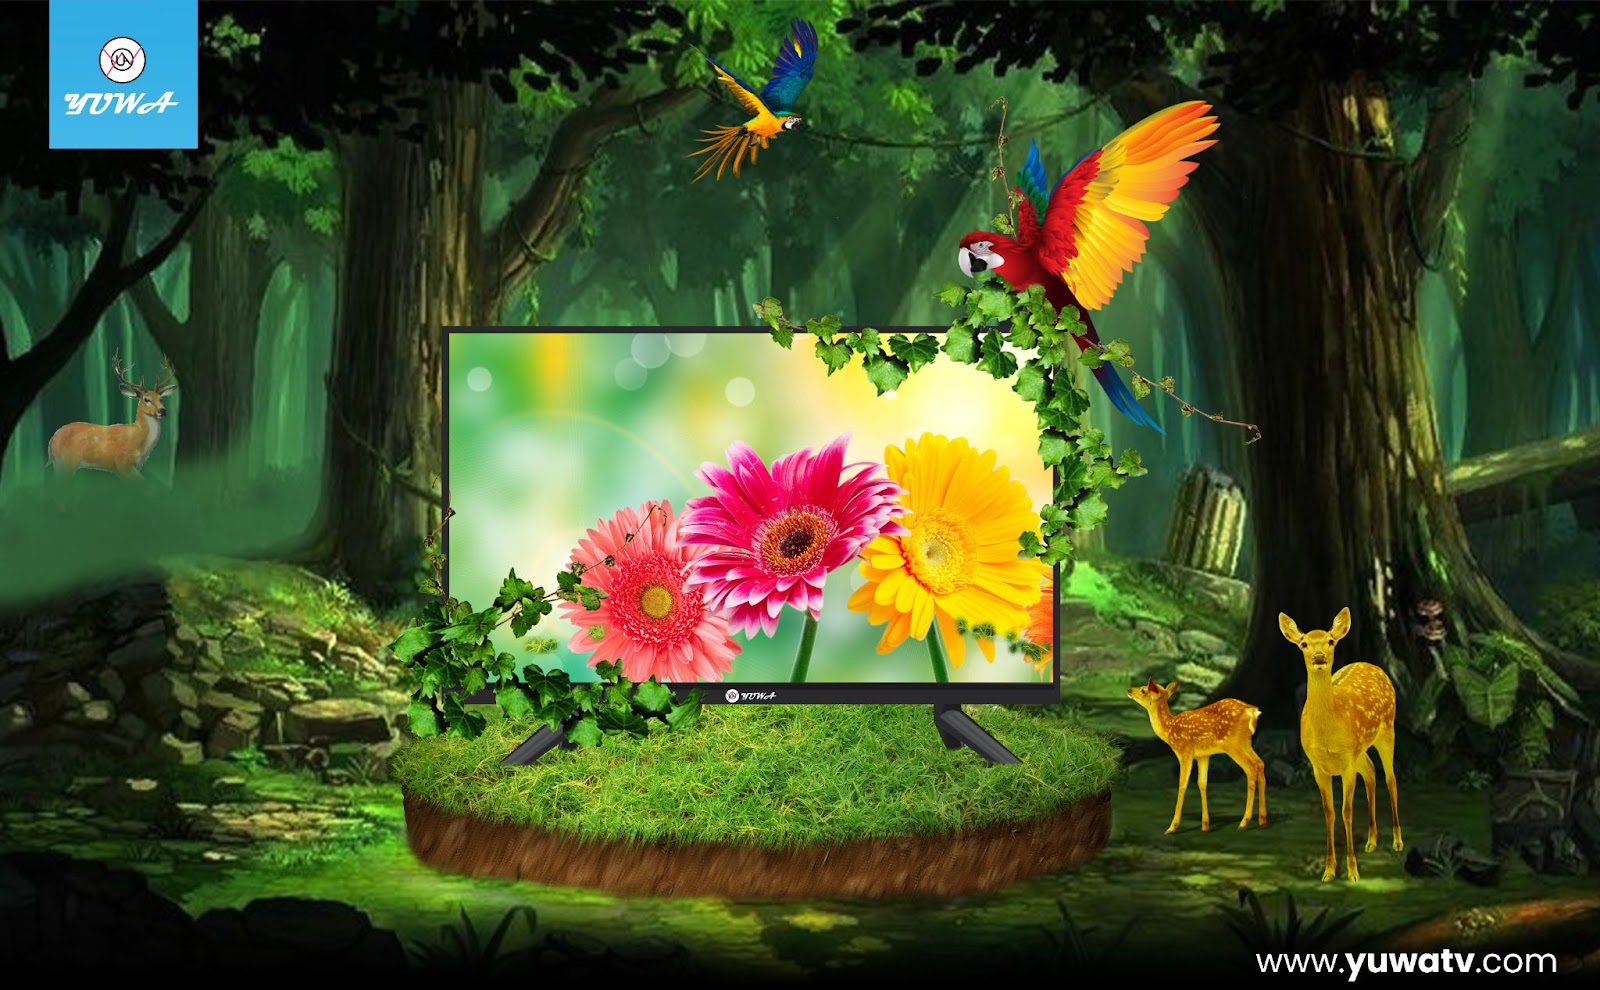 Best Smart LED Tv in India
LED TV Manufacturers
LED Tv Companies in India